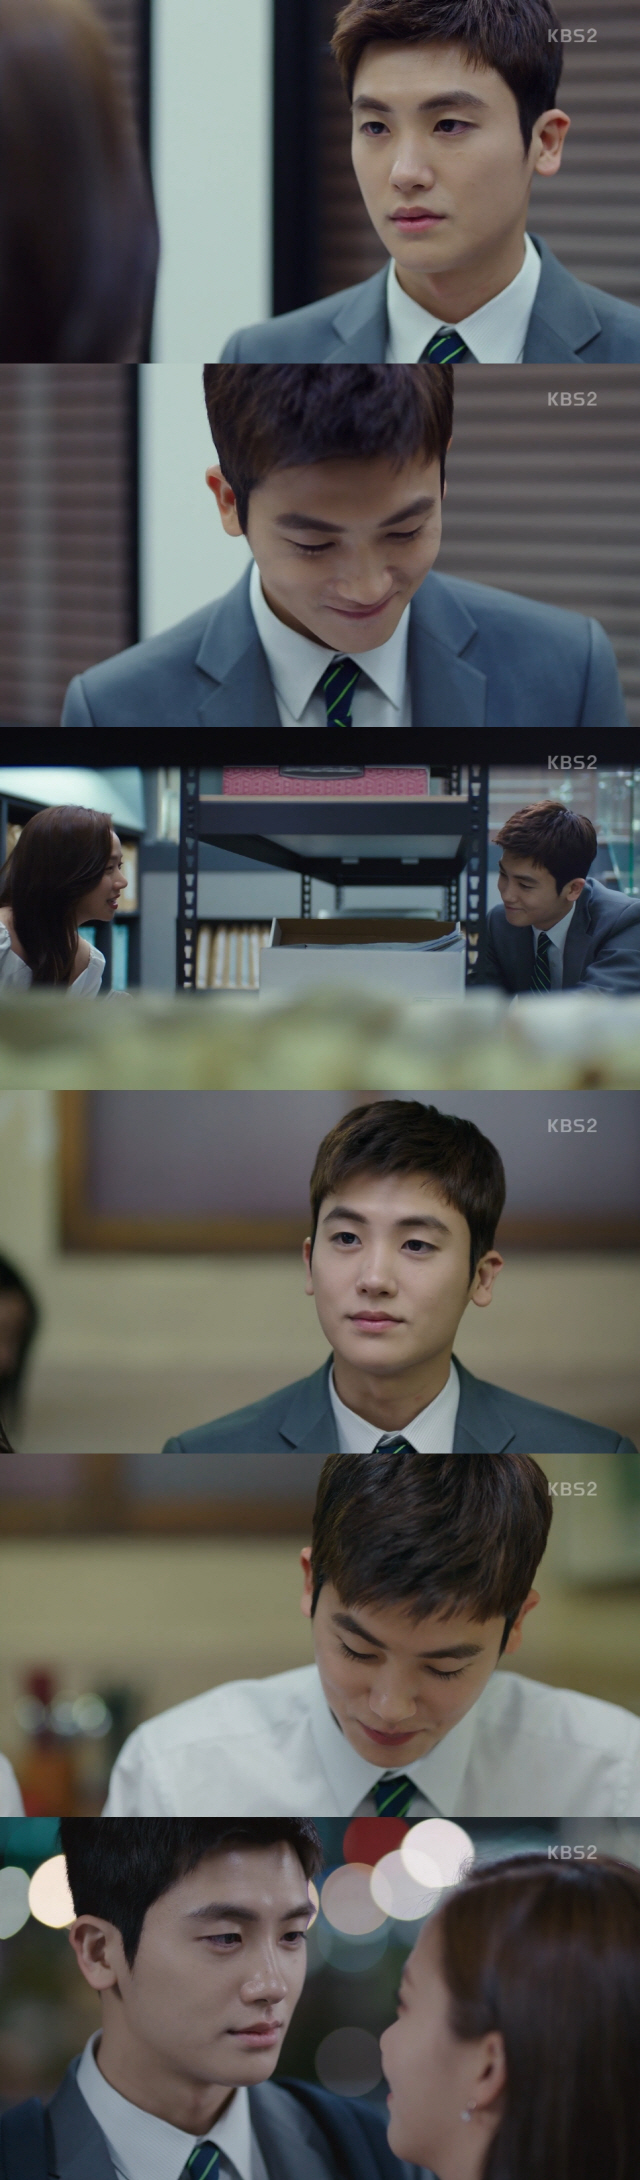 Suits Park Hyung-sik, a cute man when he loves.Park Hyung-sik plays a genius matching king in Suits, and a fake new lawyer, Ko Yeon-woo, who has empathy, and faces viewers.In the play, Ko Yeon-woo is a person who needs to show his own growth story as well as his romance with Choi Kang-seok (Jang Dong-gun).Park Hyung-sik shows his unique character expression ability and draws his own color with his own color and Suits.In the 13th episode of Suits, which was broadcast on June 6, the special charm of the character, such as Ko Yeon-woo, was noticeably outstanding in the expression of Park Hyung-sik, which sensibly captures it.At the center was the keyword Love, a radical romance of a rabbit couple who showed a thrilling kiss on the last broadcast.On this day, Ko Yeon-woo approached Kim Ji-na (Go Sung-hee) with apologetic regret that she failed to keep her dinner promise, such as hovering around her side or talking to her constantly.I just started to love, but the cuteness of a man who is still in love is outstanding.In addition, Kim Ji-na and her grandmother, or even the proposal, but the scene of the ring was not enough to add to the scene of the house theater with pink excitement.The decisive reason why the house theater cheers on Ko Yeon-woos love is because it shows a reversal from the existing character called Genius.It is a poor and awkward appearance in front of love, with a perfect memory of anything, excellent situation judgment and coping ability.It is a special charm of the character of Ko Yeon-woo to answer Yes honestly even though it seems to jump to the question whether he has not been in love.And above all, the expression of actor Park Hyung-sik, who perfectly captures the lovely charm of this kind of actor, can not be missed.Park Hyung-sik conveys all the true heart, excitement, throbbing, and affection with one eye depending on the situation.Here, we show the change of the character flexibly depending on who the opponent is.In fact, everyone will react slightly differently to each other, but it is not easy to express them in characters because they need sensual and detailed acting.But hes a man who changes more in love. Hes got to steal the audience. Park Hyung-sik, who thought he was just a romance.Because of Park Hyung-sik, viewers will also wait for Suits in front of TV.